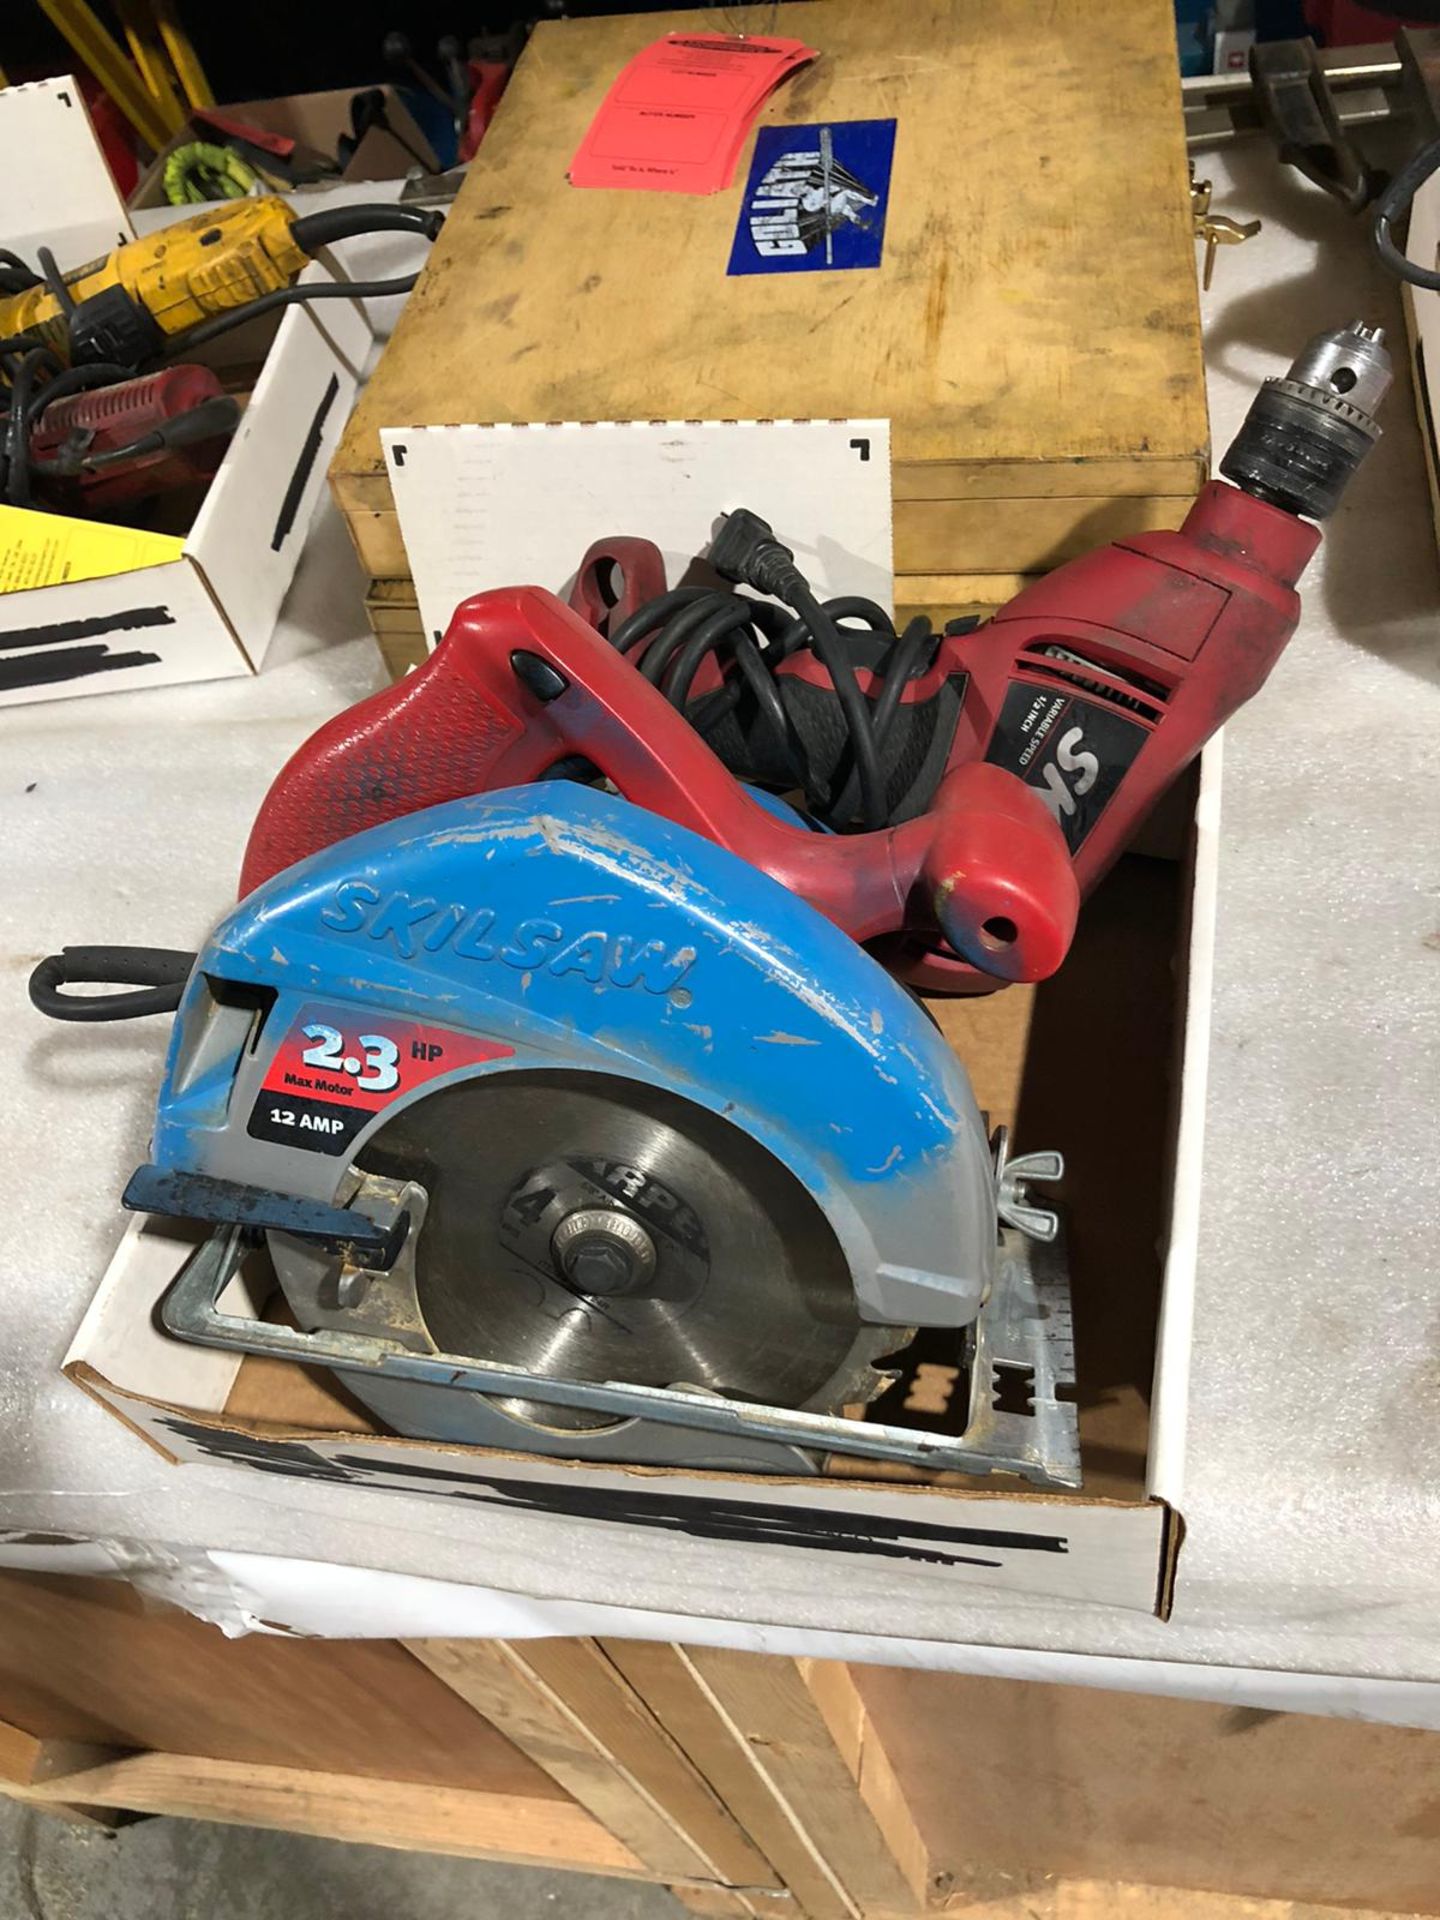 Lot of 2 (2 units) Skil Saw Circular Saw and Drill - Image 2 of 2